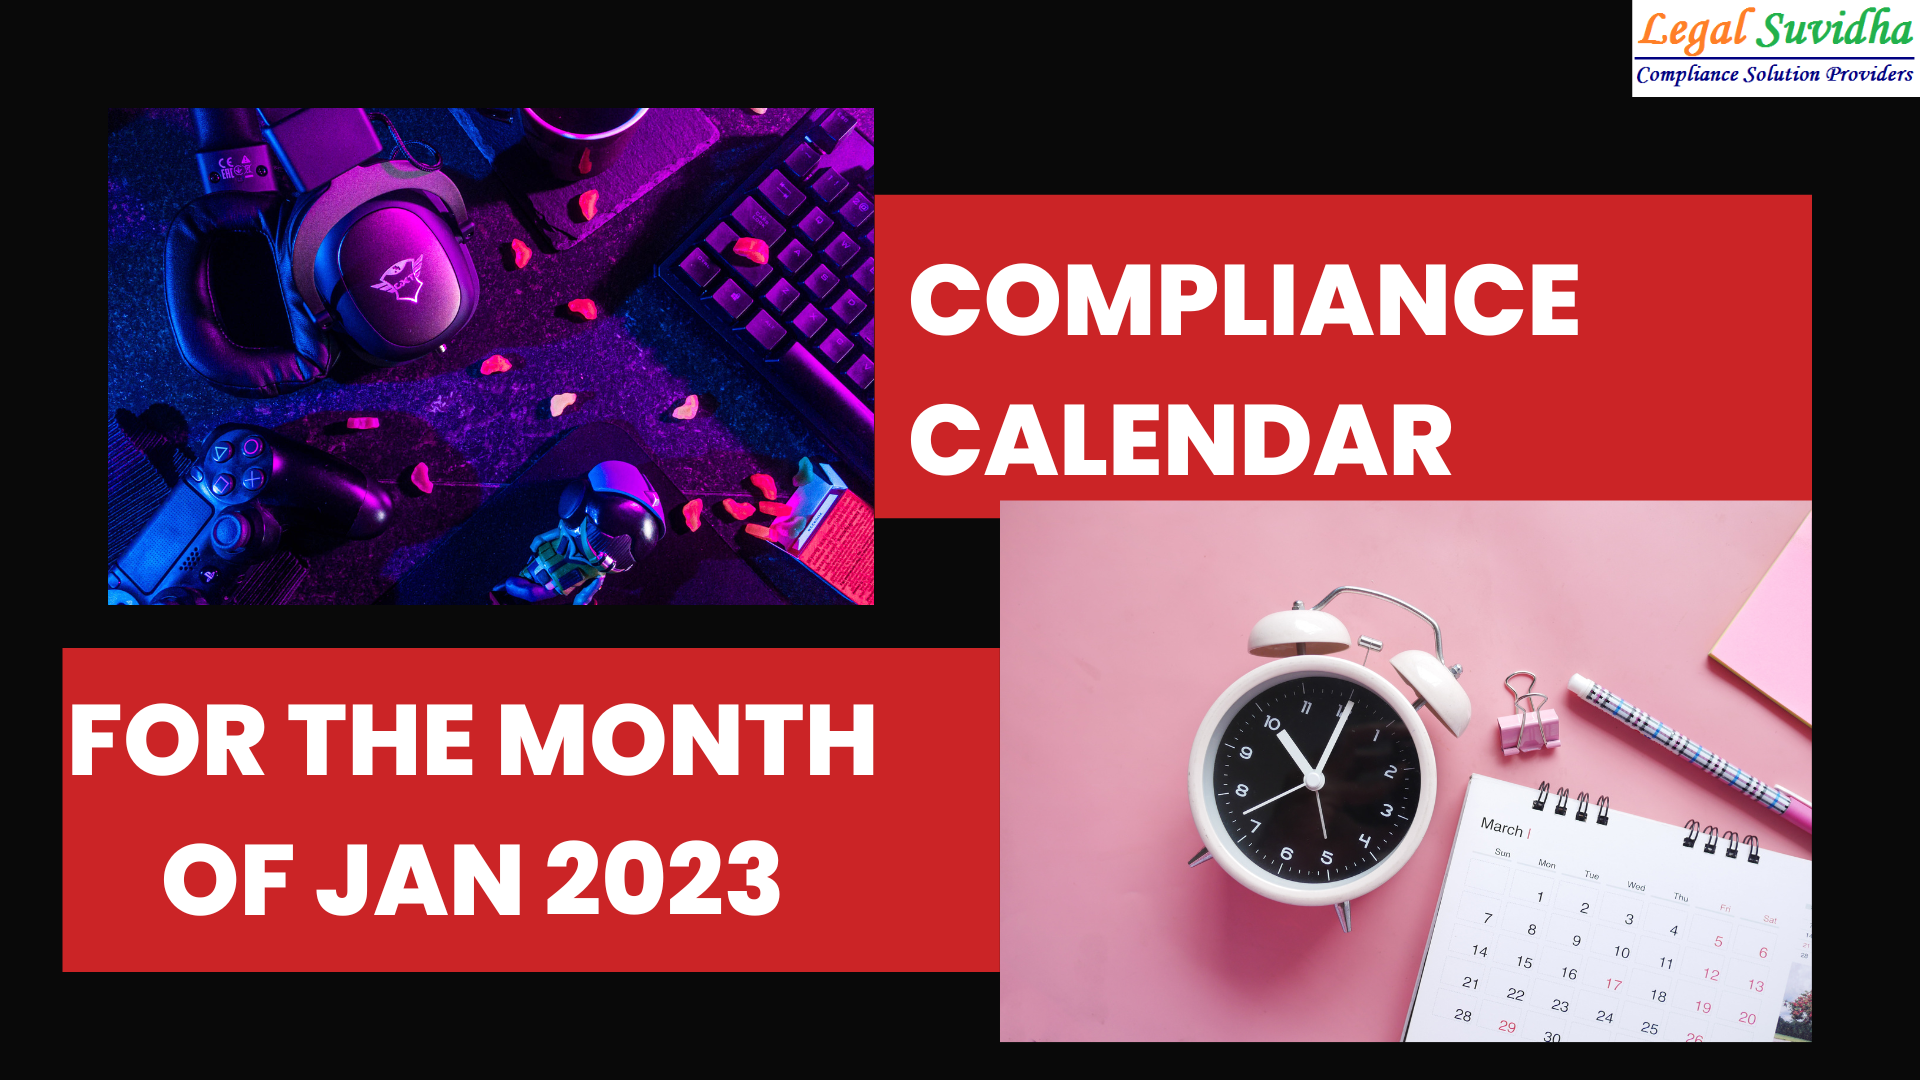 Compliance Calendar for the month January 2023